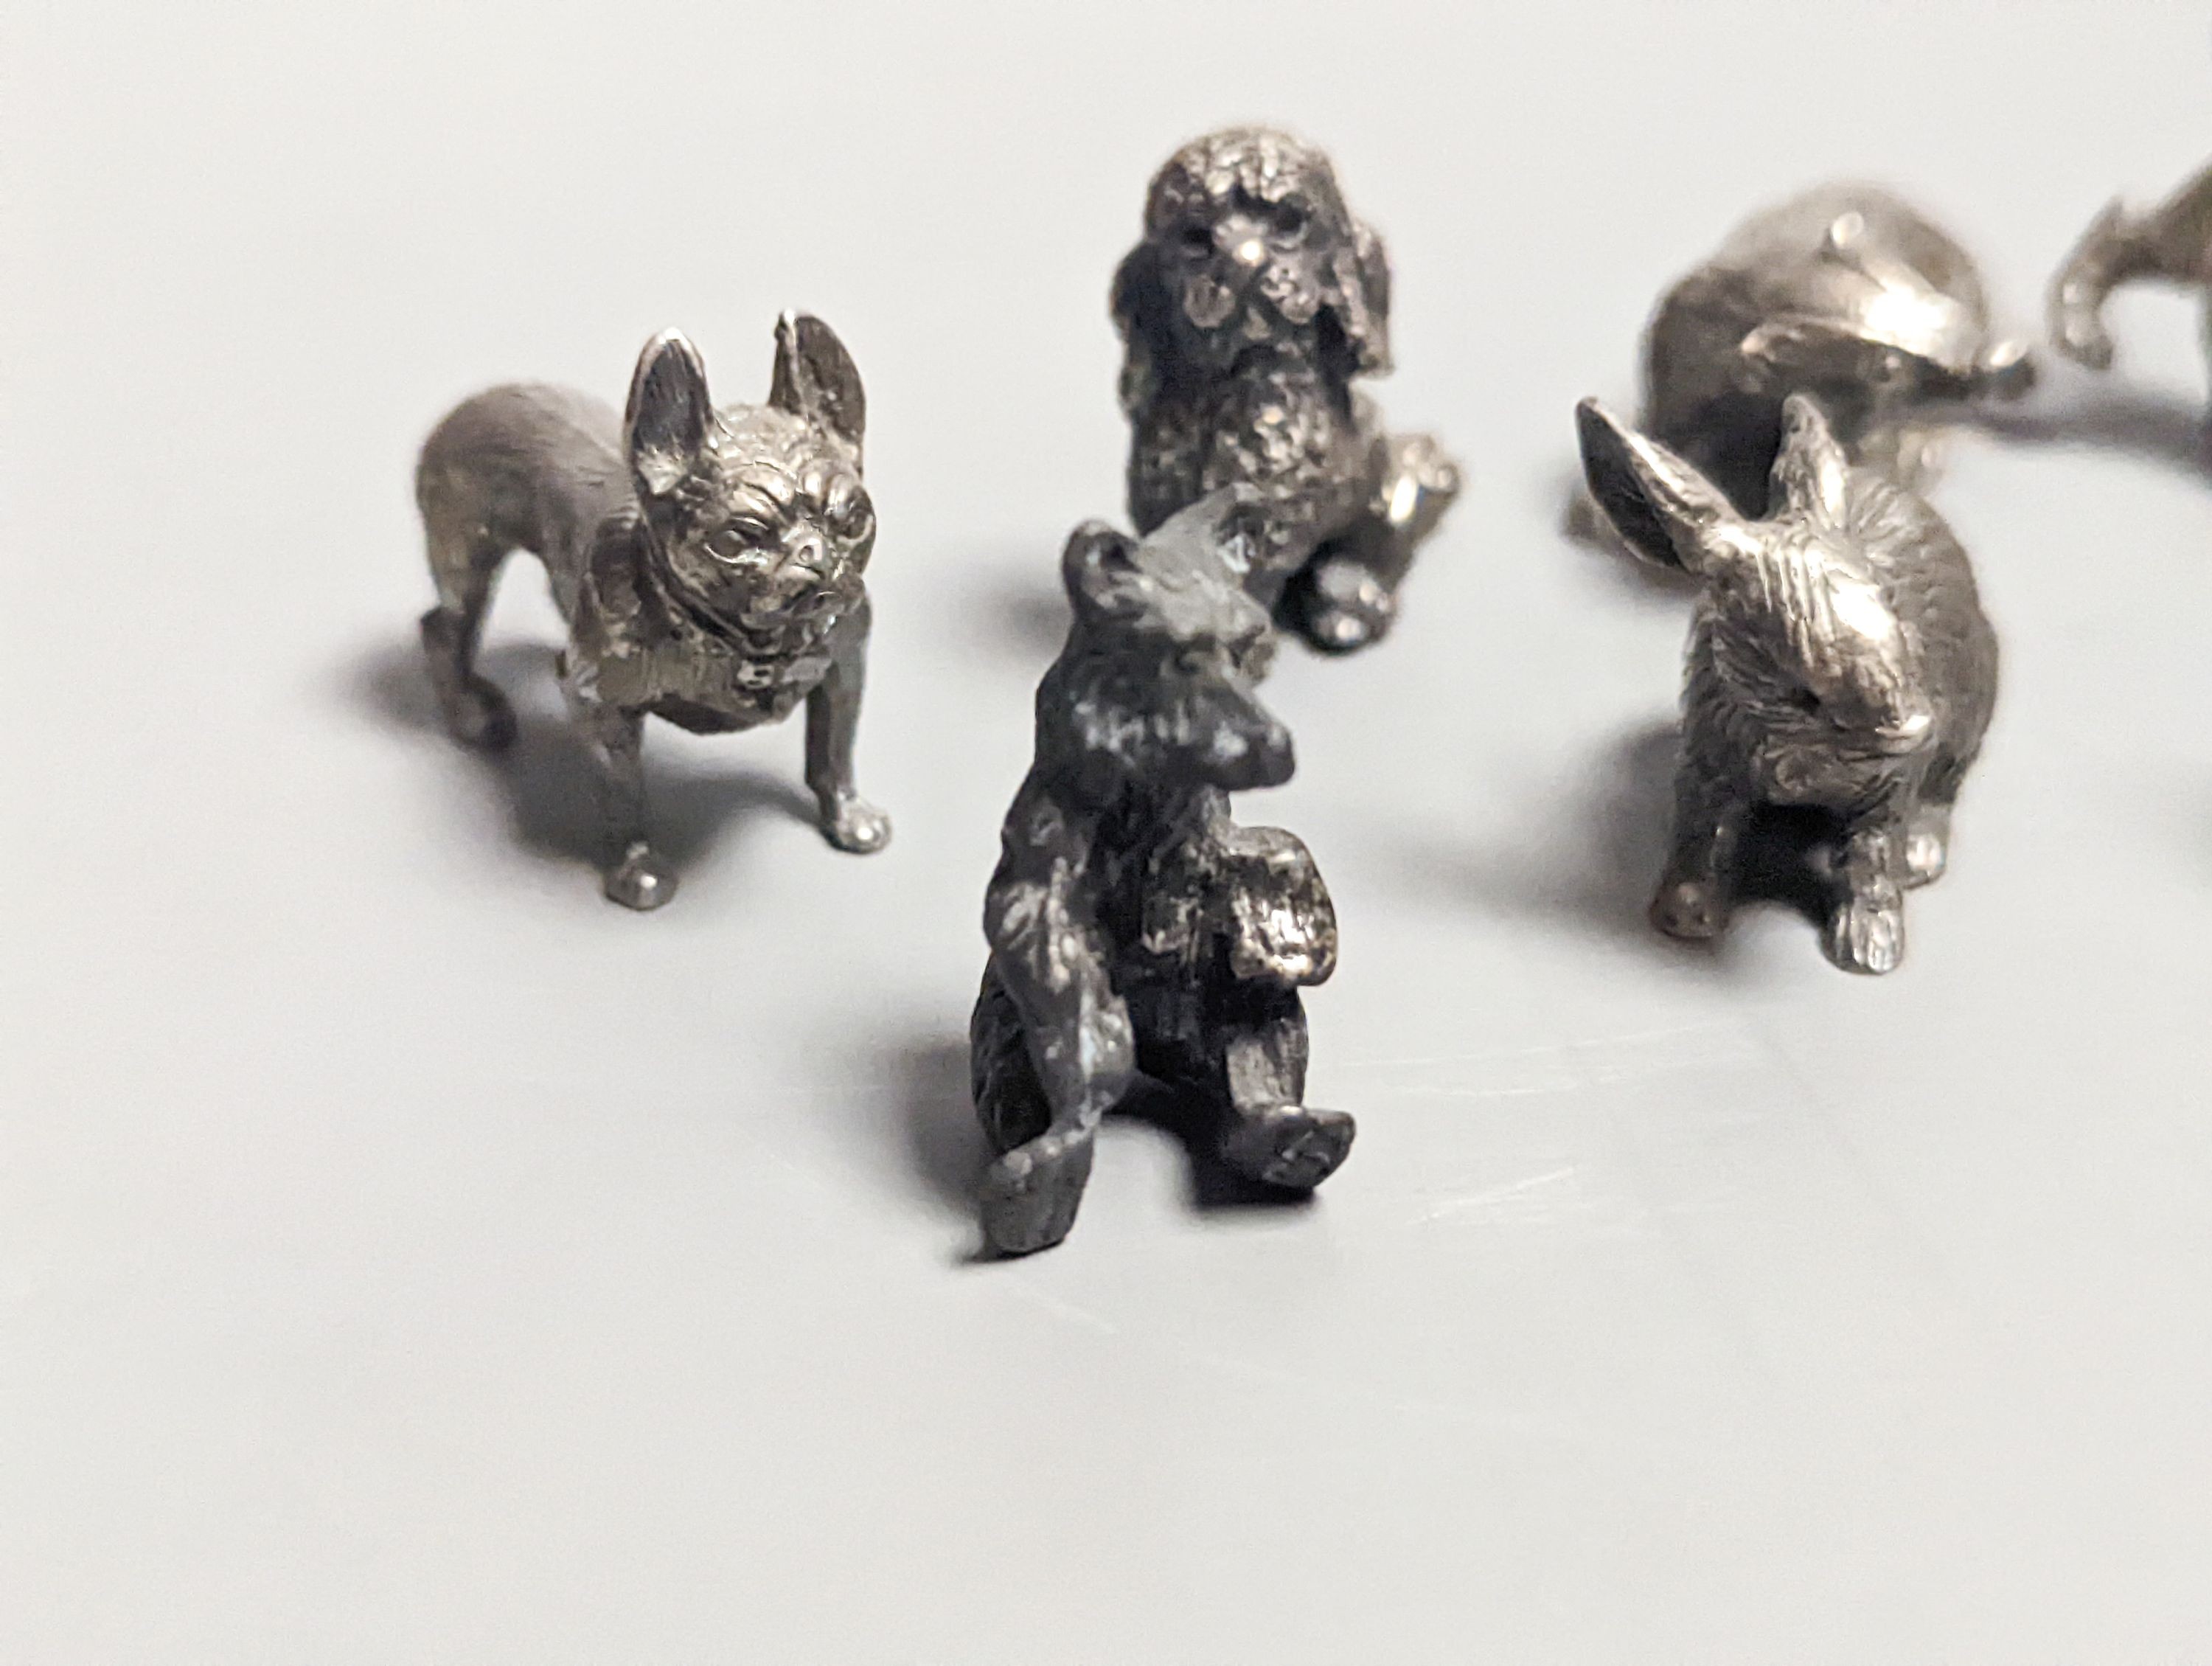 Four modern miniature freestanding model animals, including, badger, two dogs and a cat, JJSM, London, 1989 &1991, cat length 37mm, two Italian 925 models and two base metal models.